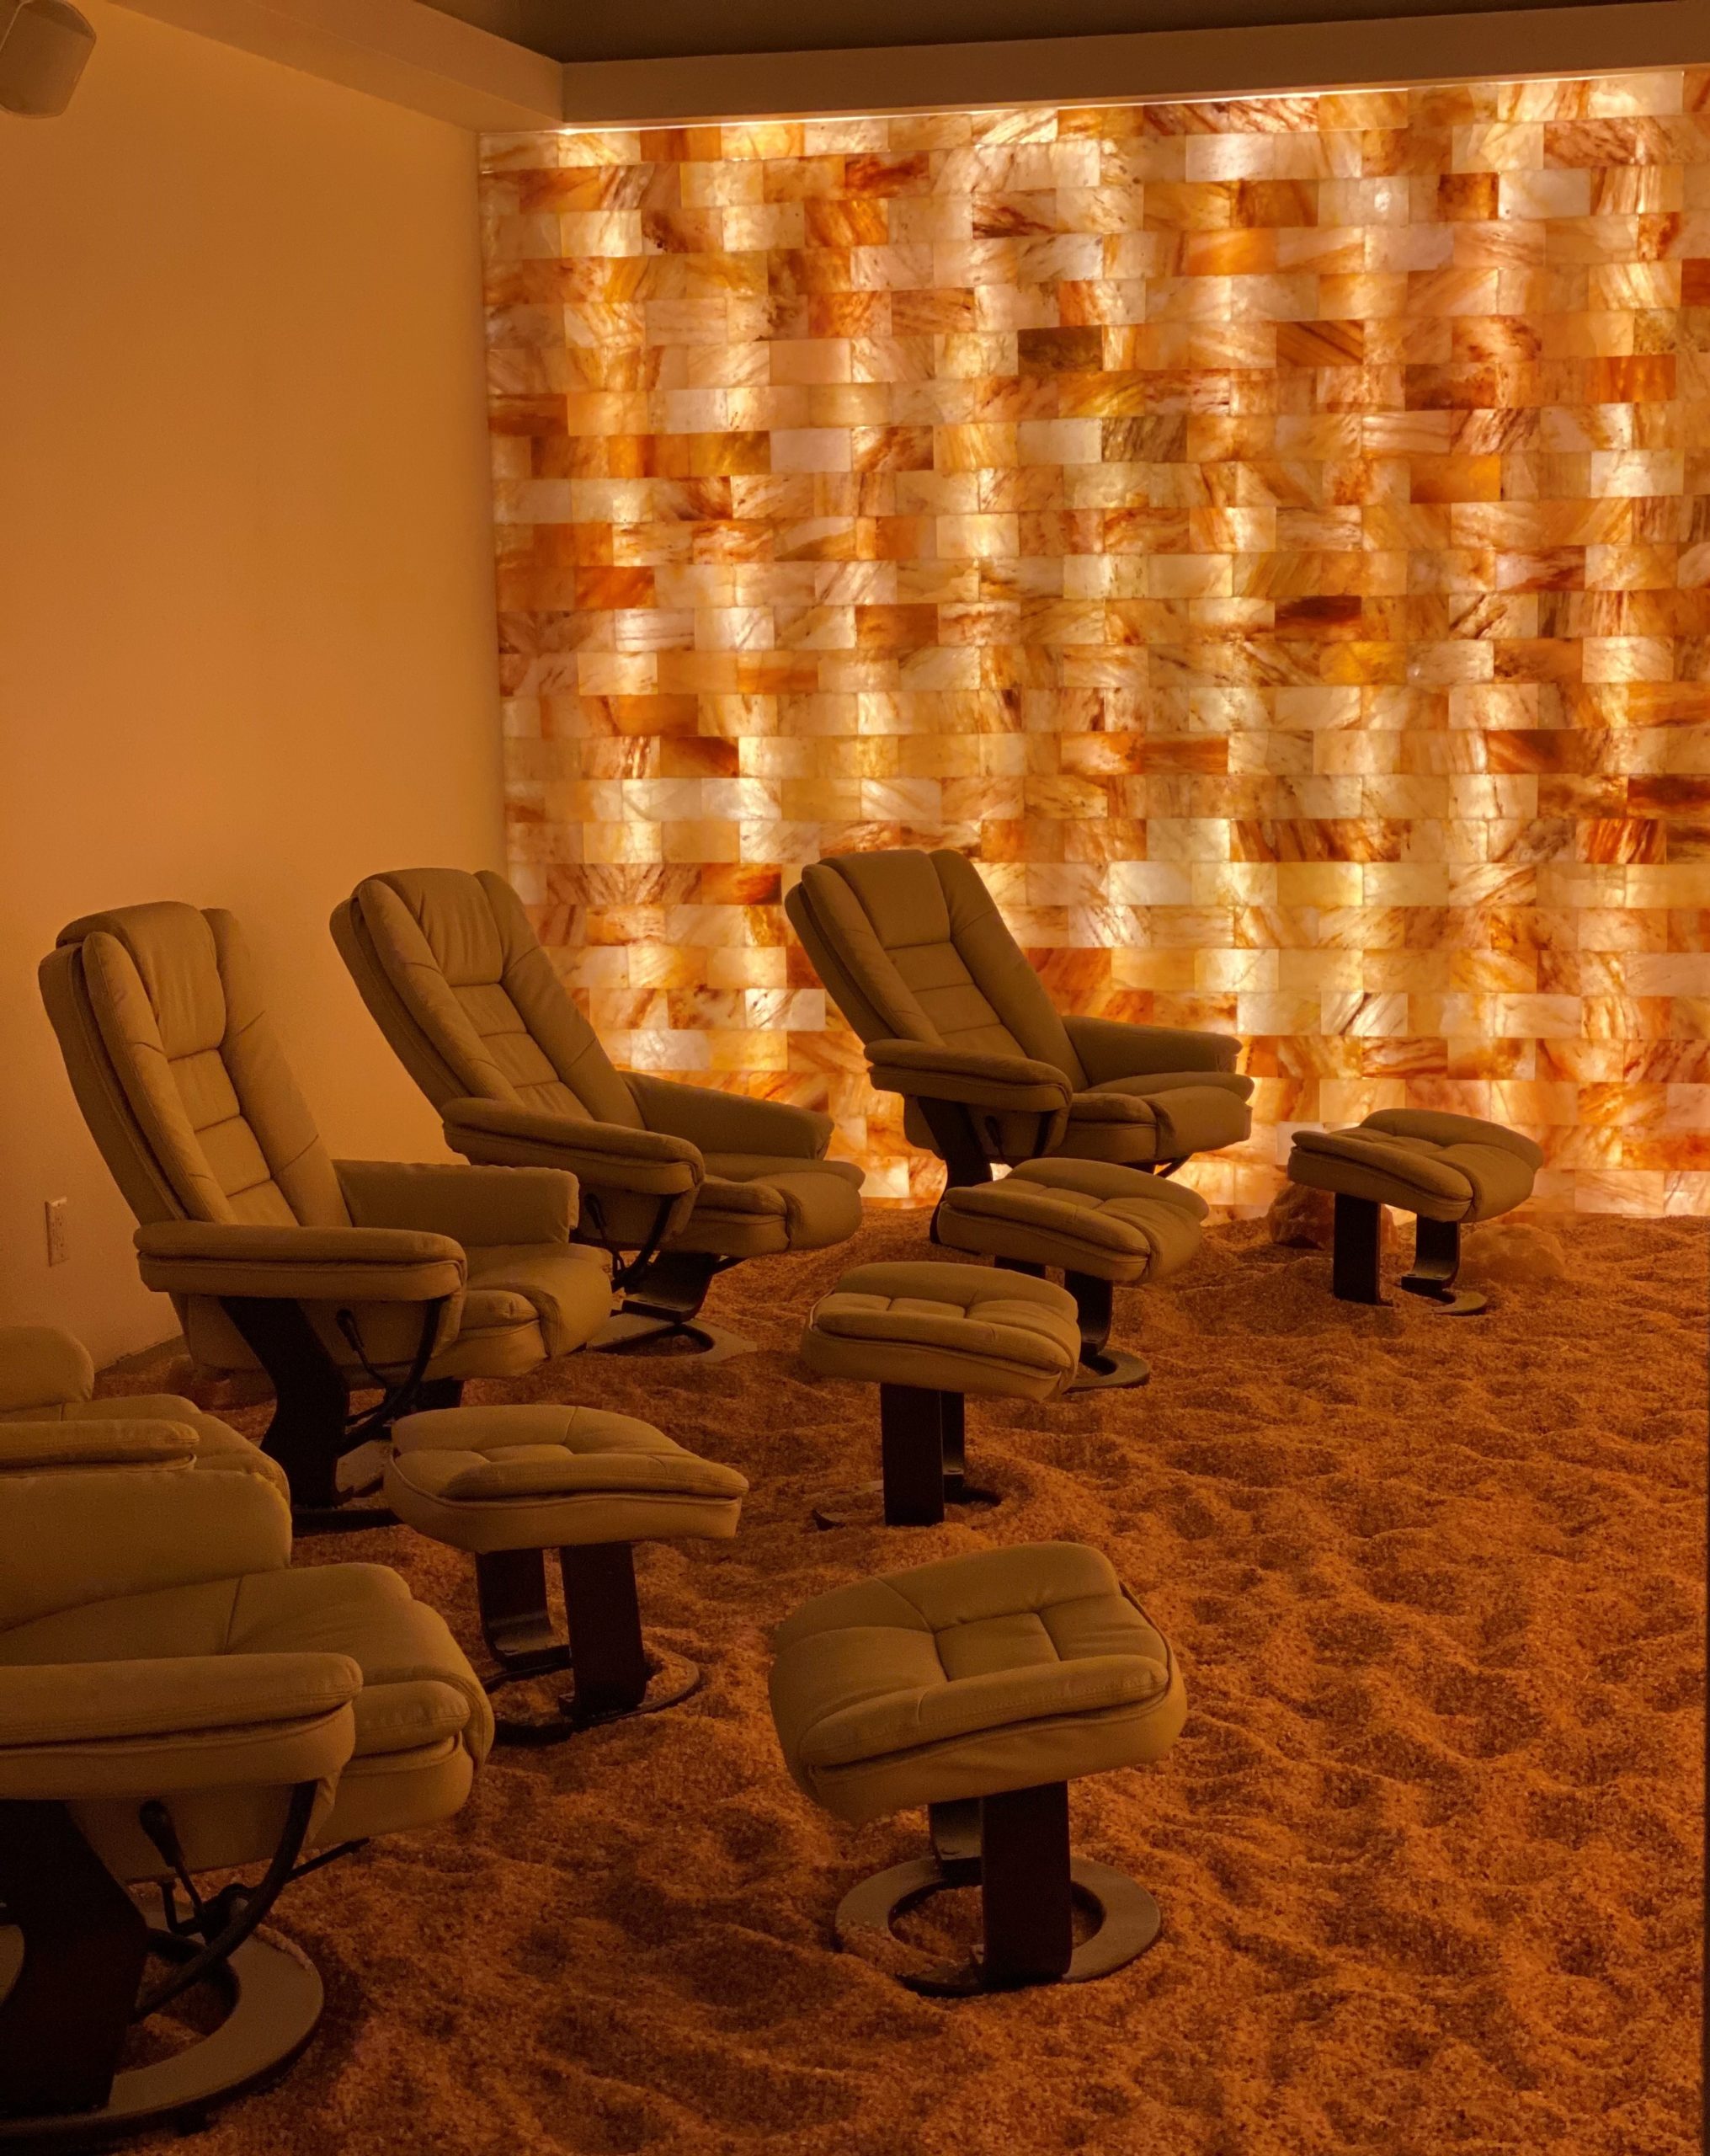 Five cushioned chairs on a Himalayan salt-covered floor next two a LED backlit salt panel wall.